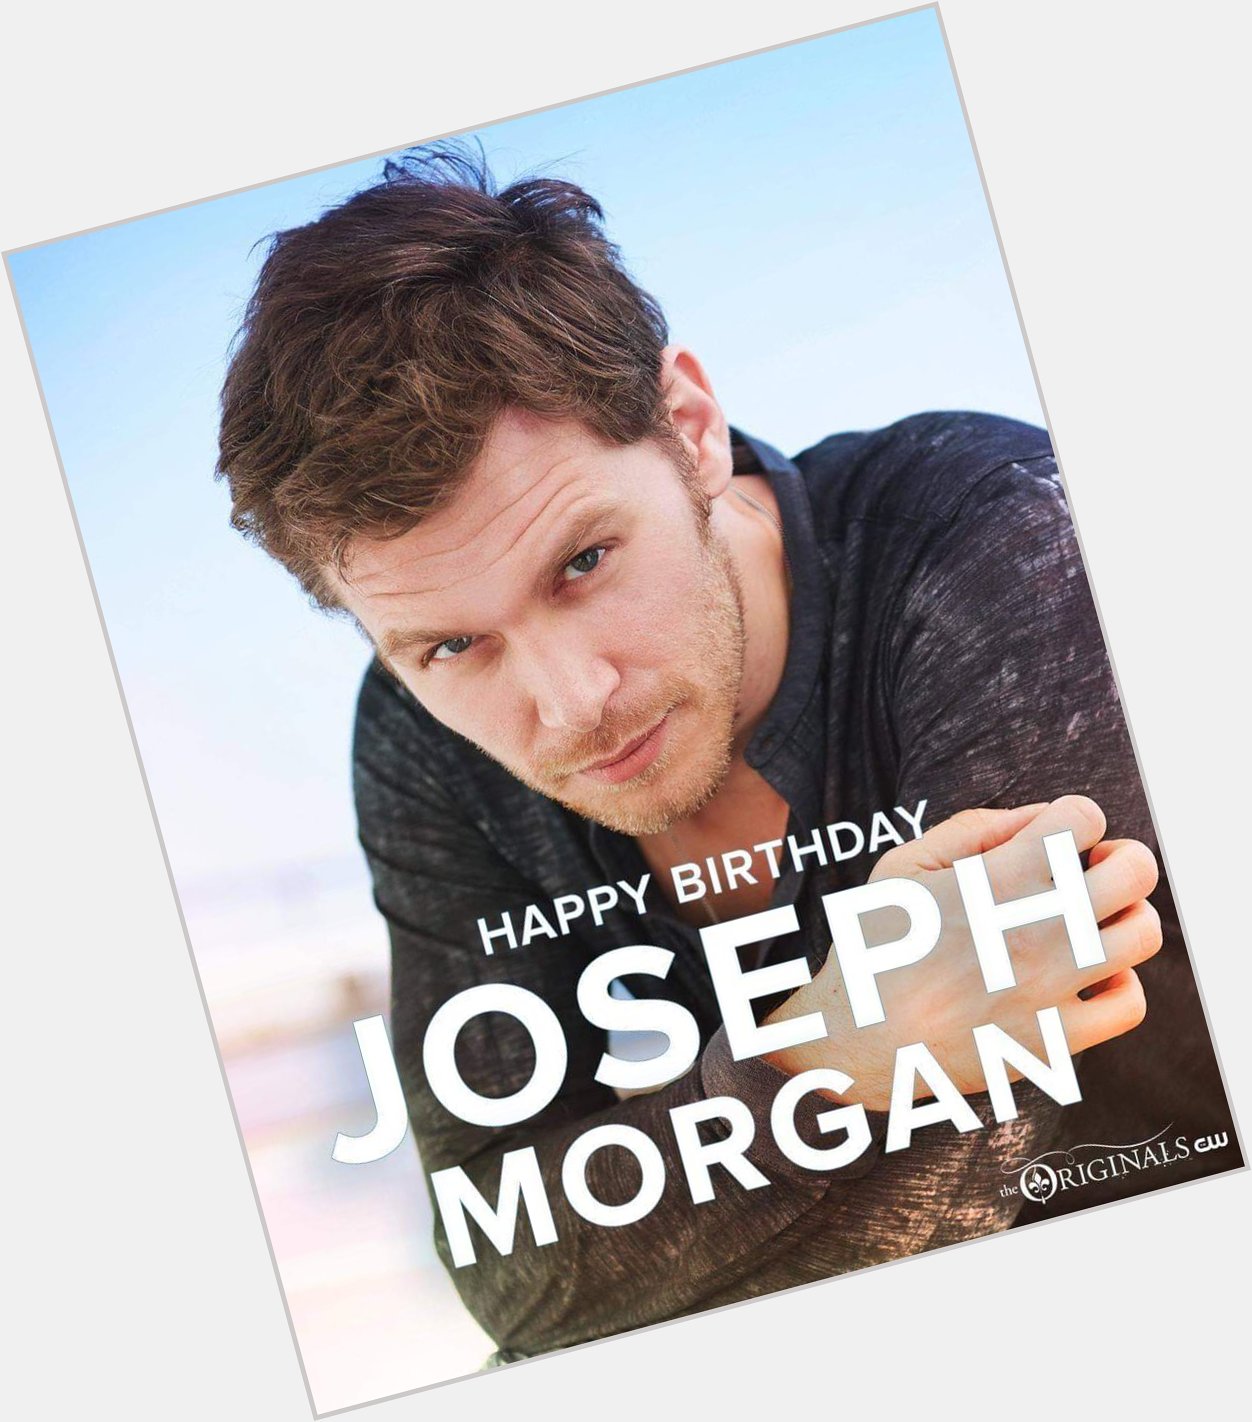 Happy Birthday Joseph Morgan famously known as Nick Klaus for the love of the originals 